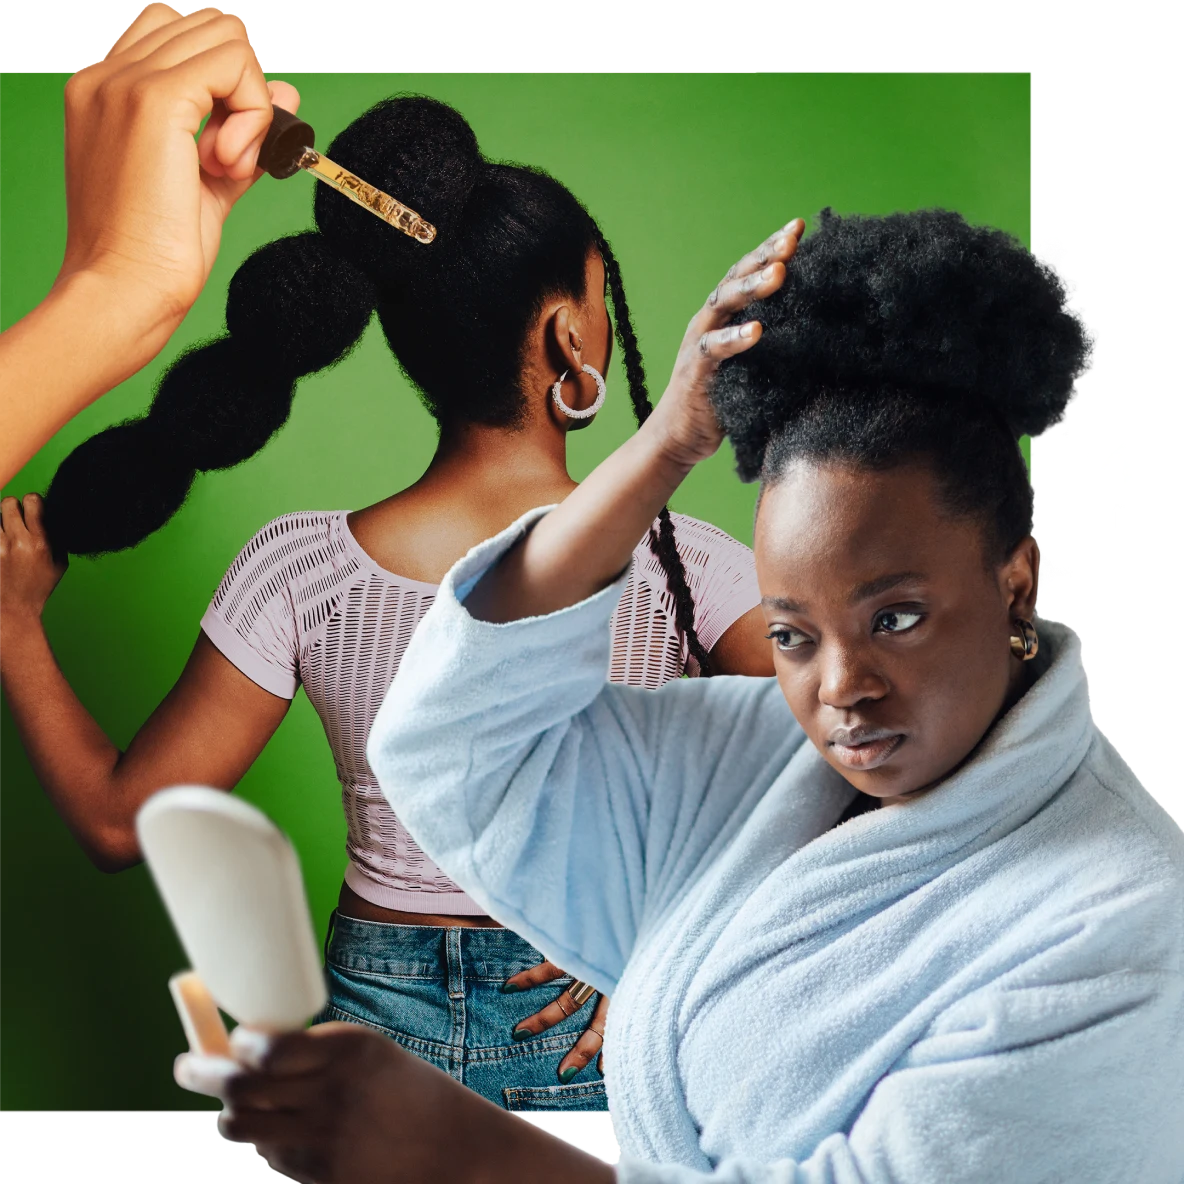 On the right, a Black woman in a light blue robe, is looking in a hand mirror and touching her natural hair. On the left, is a hand holding an eye dropper. In the background, a Black woman in a pink shirt and jeans, holds the bottom of her puffed ponytail.
